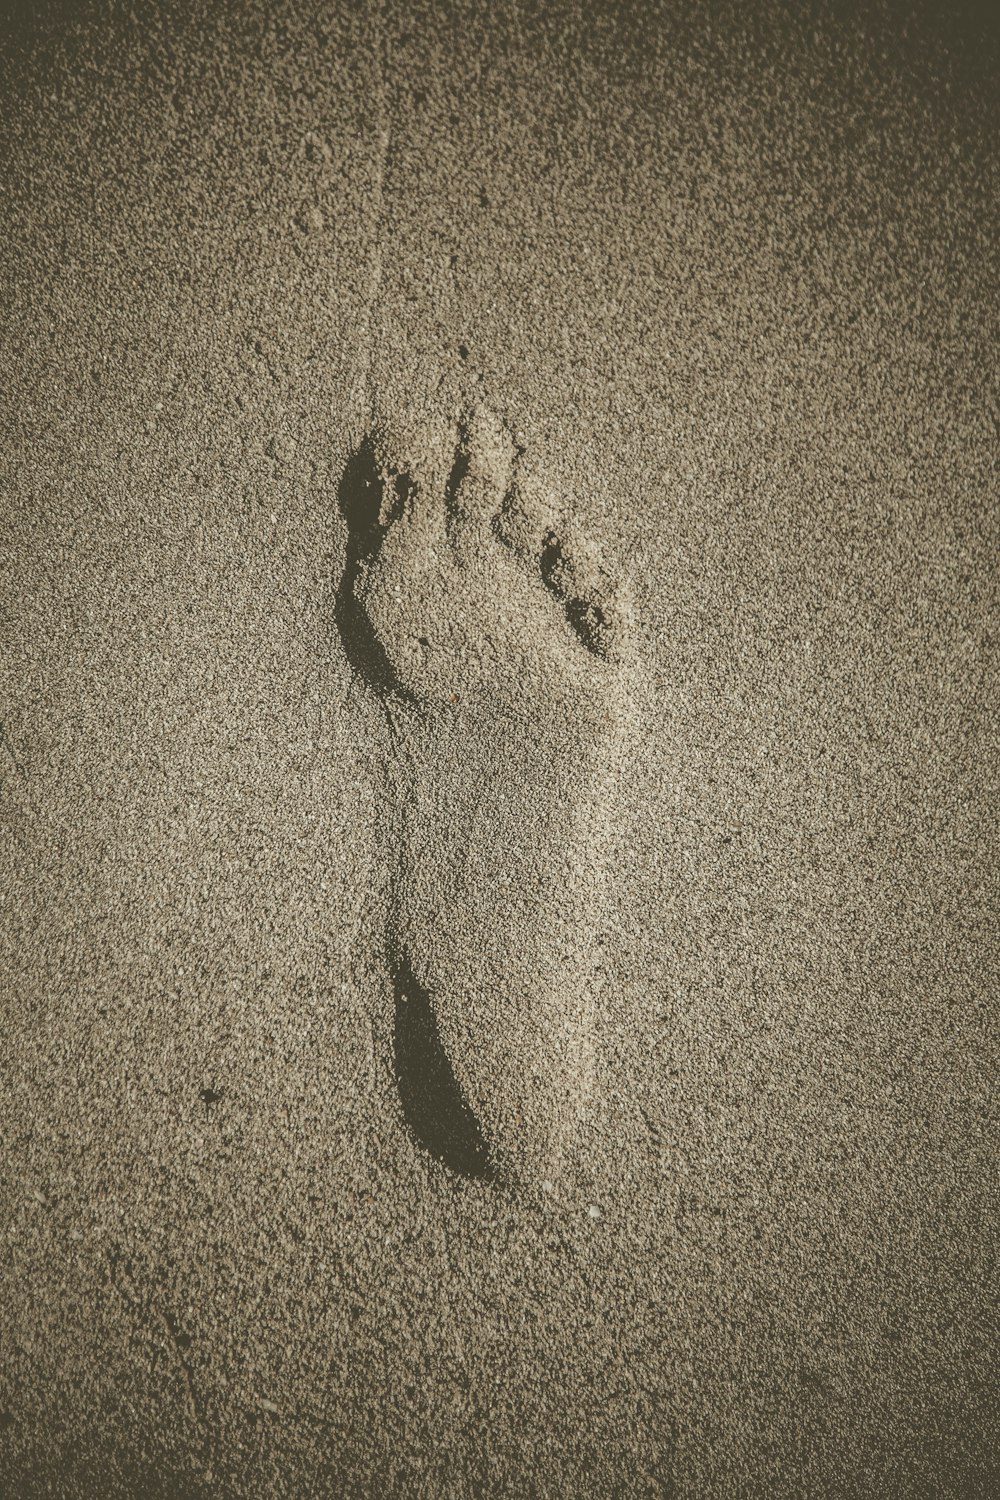 person foot print on sand